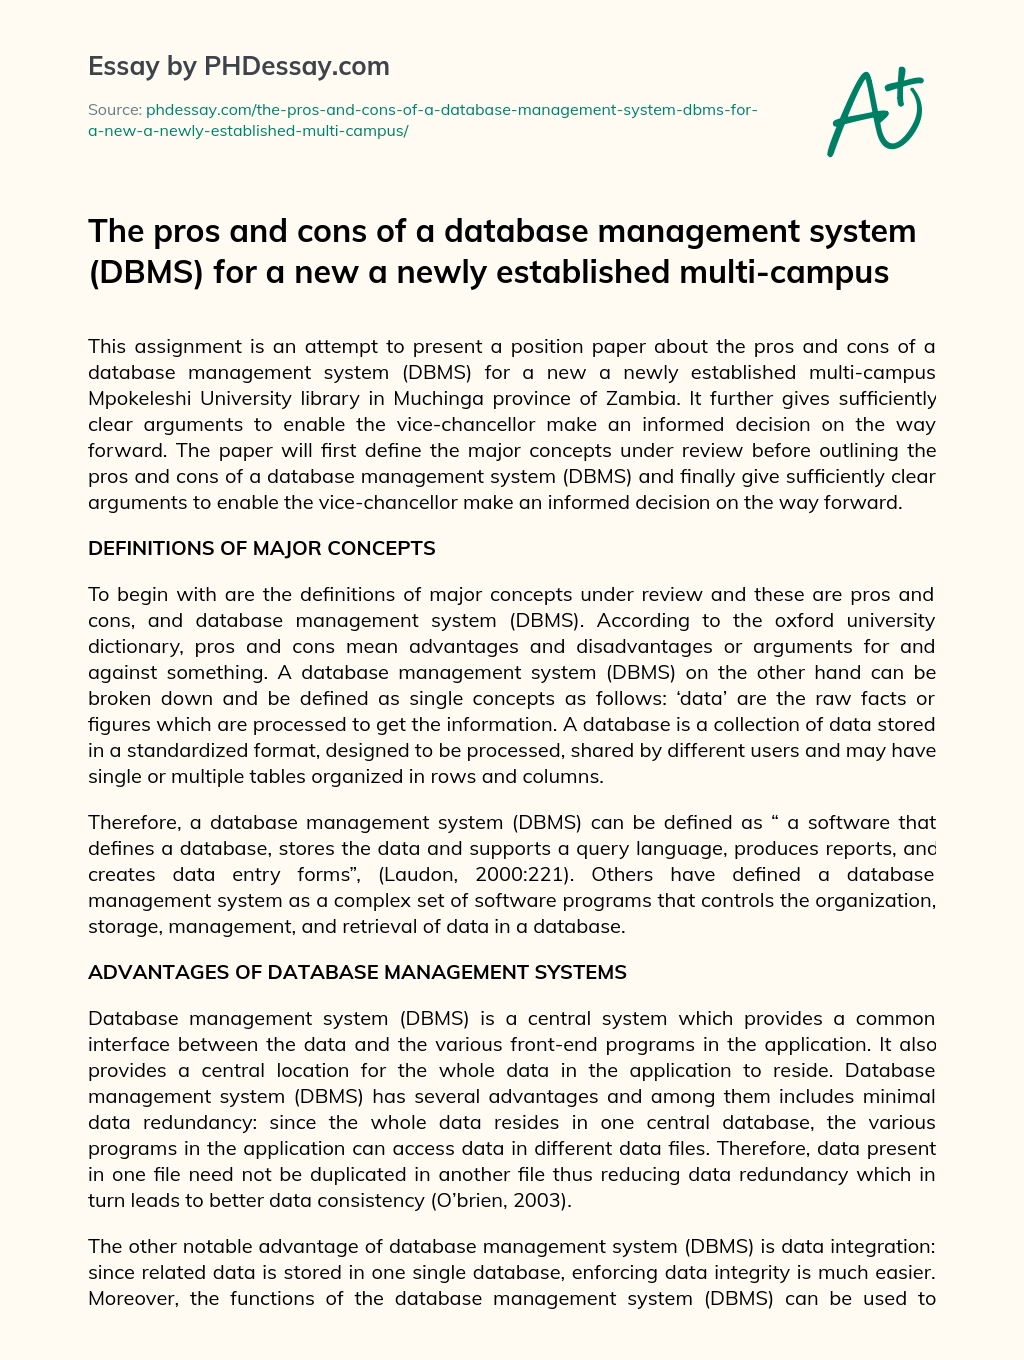 The pros and cons of a database management system (DBMS) for a new a newly established multi-campus essay